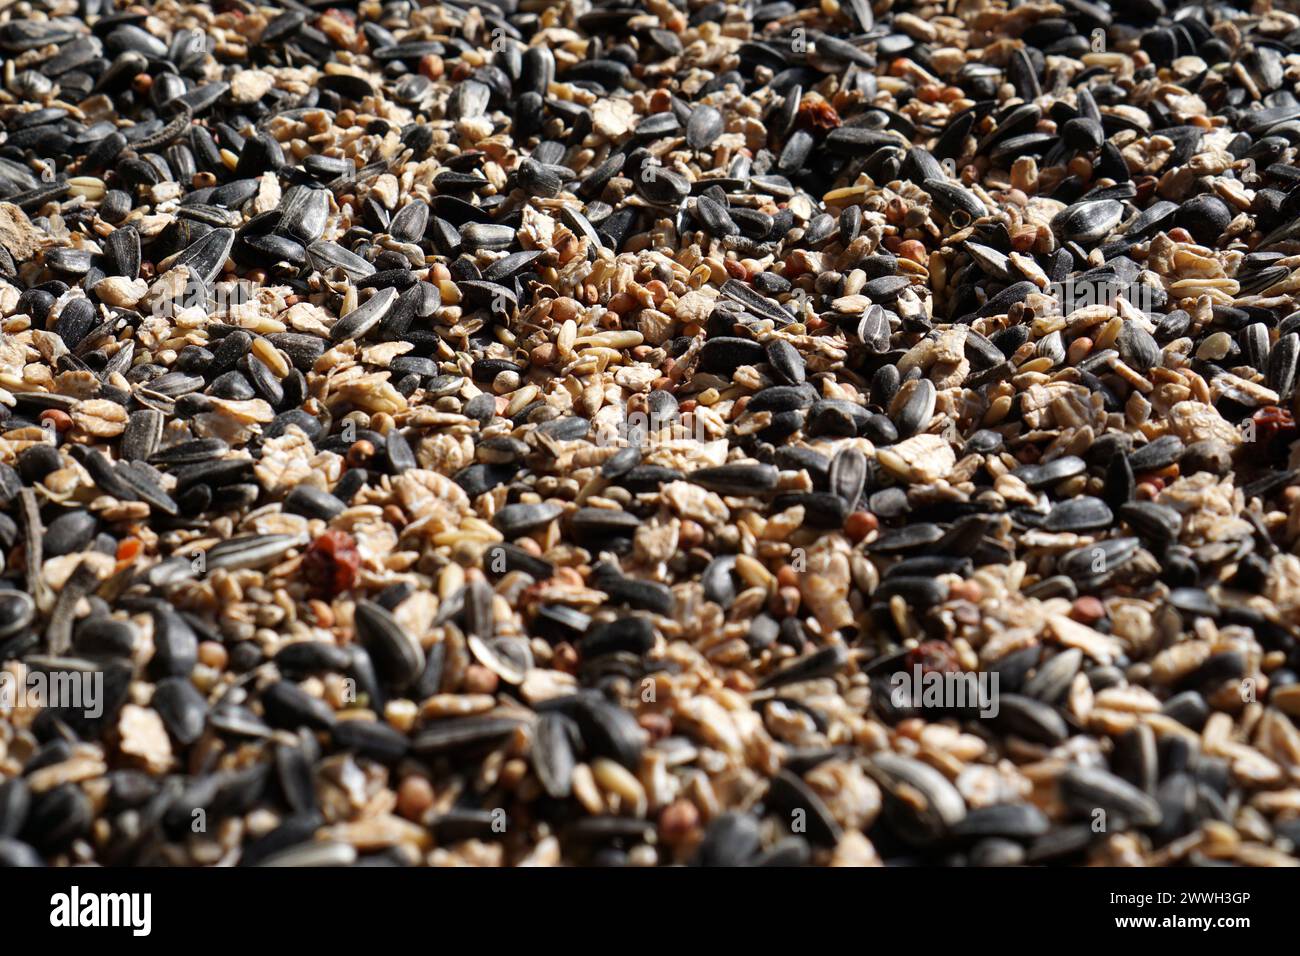 Close up of mixture of bird seeds, including oilseeds like unpeeled sunflower seeds and Oats Stock Photo